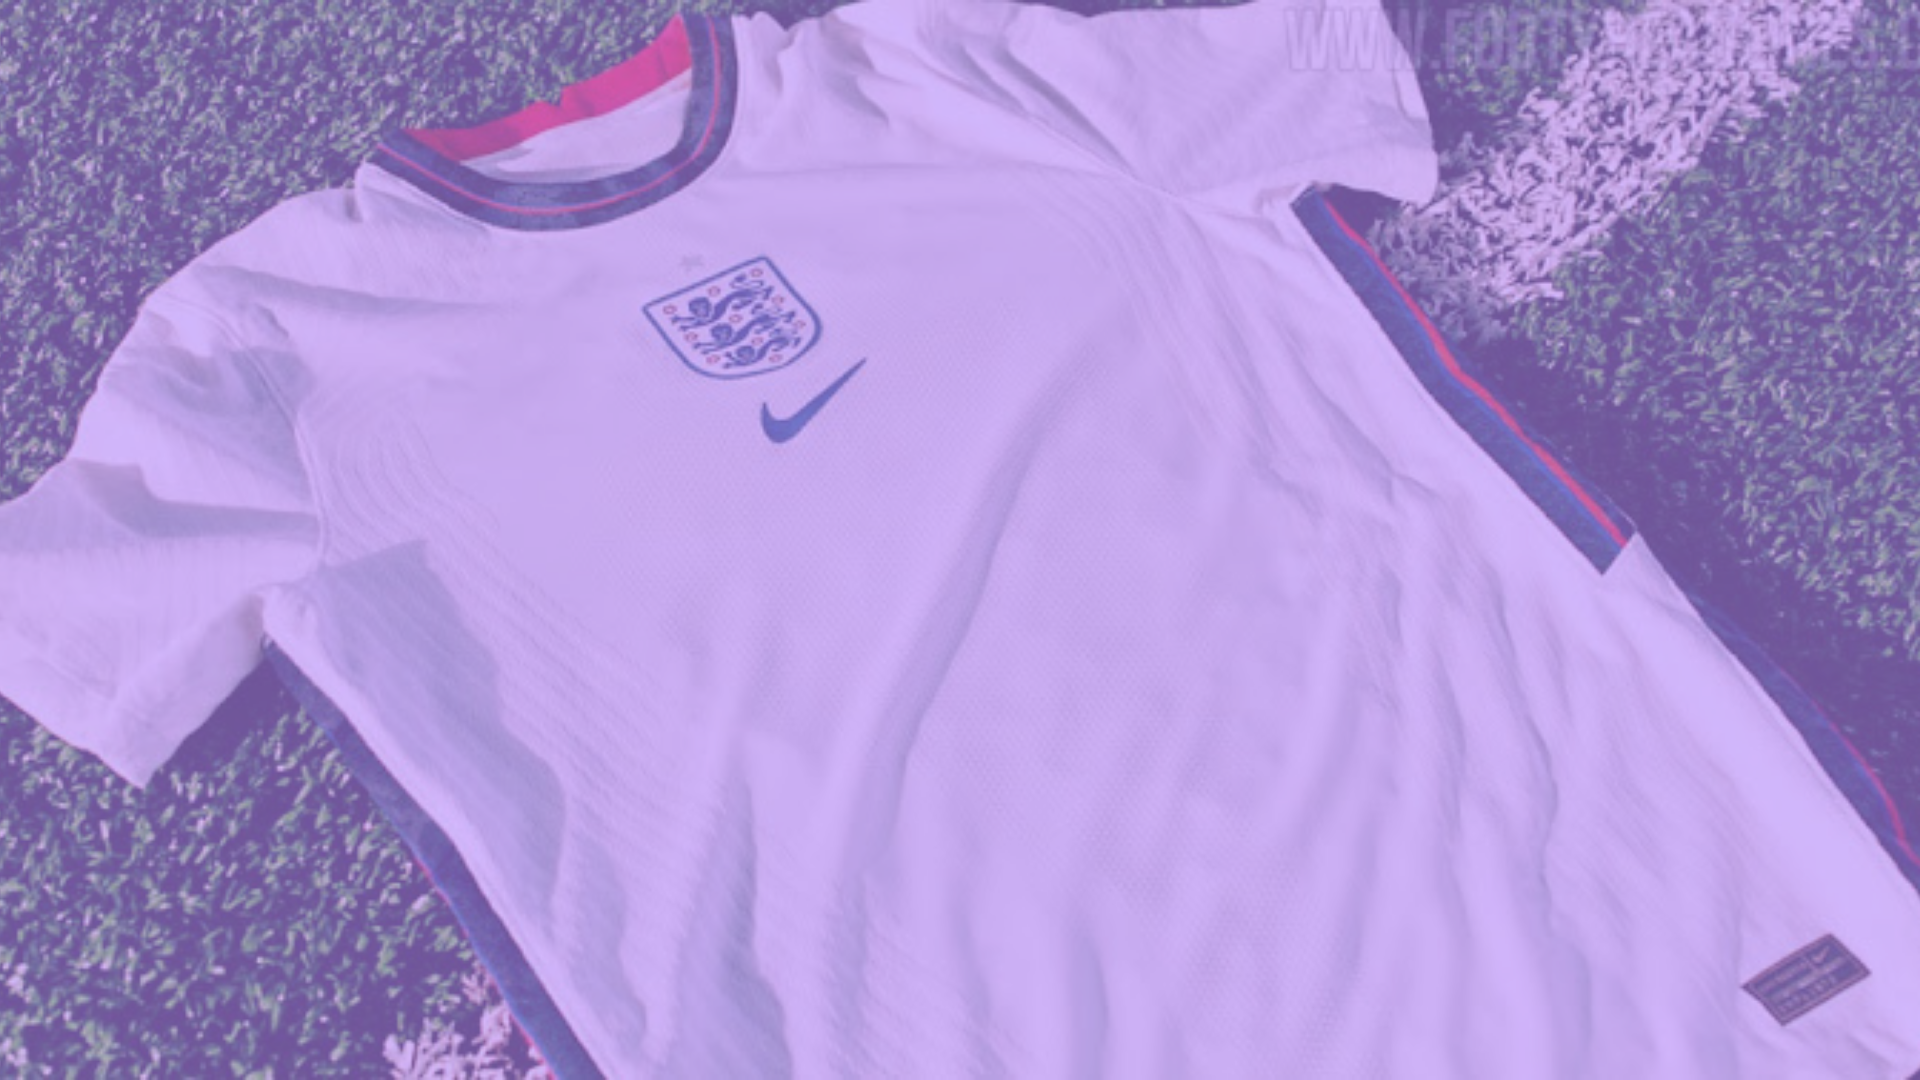 What makes an England shirt iconic?